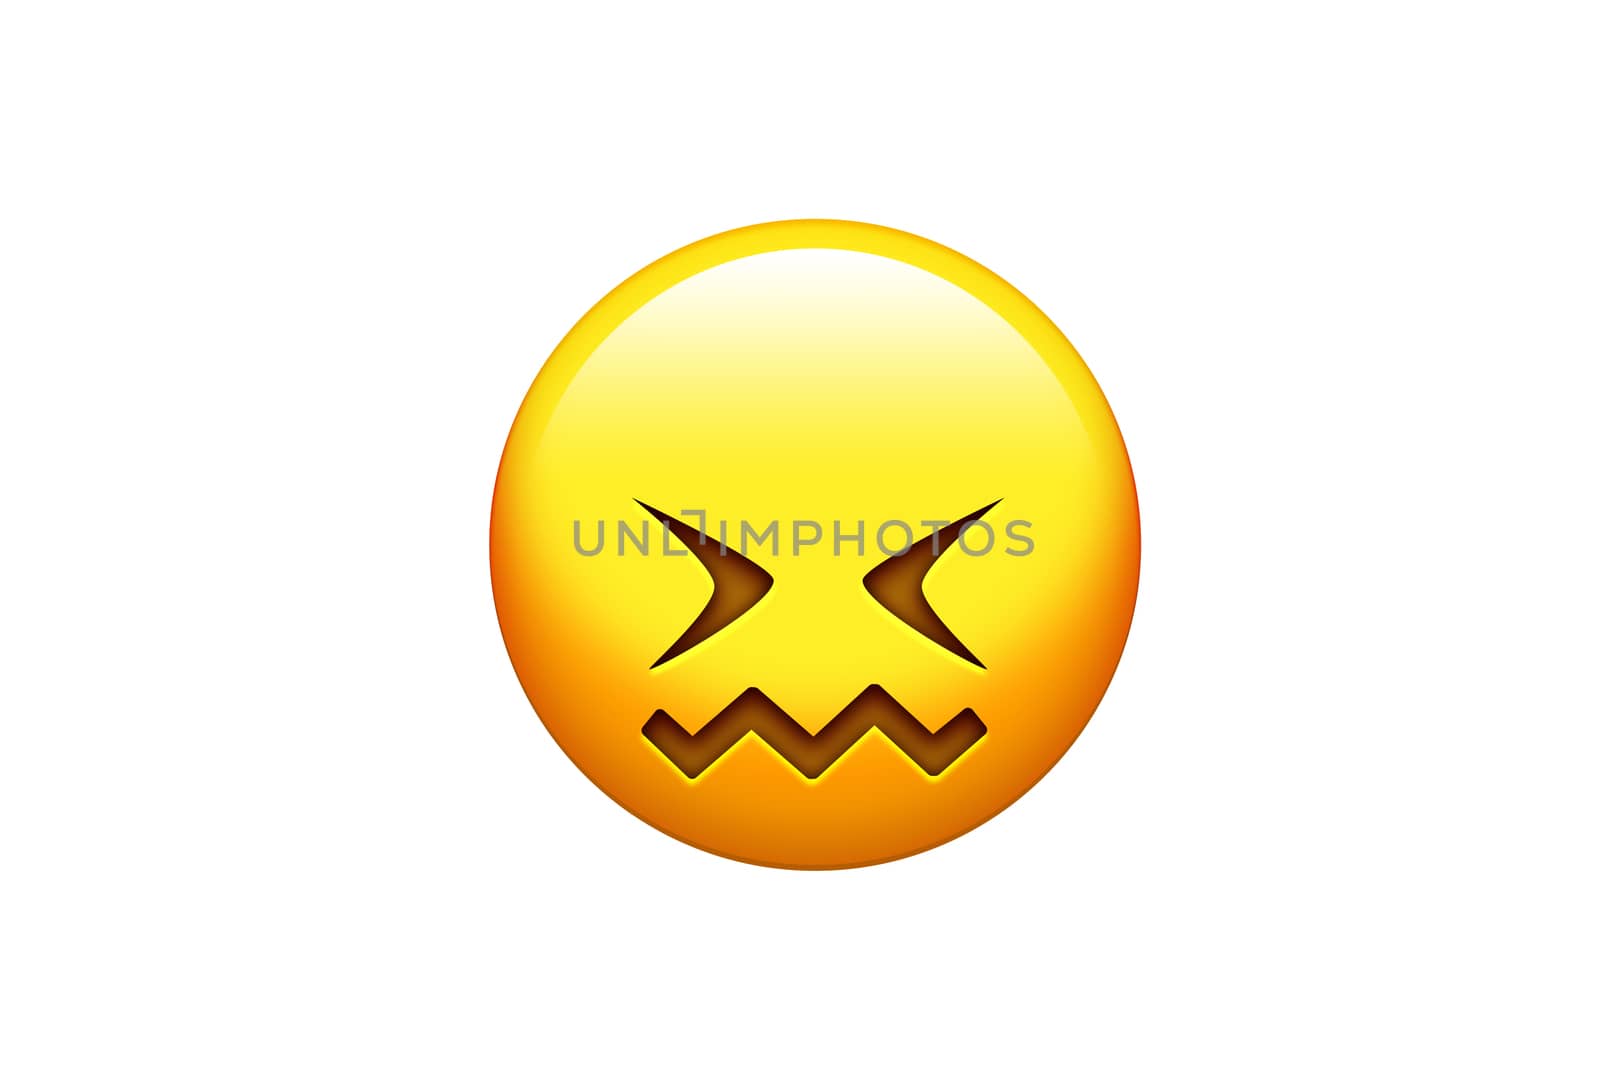 The emoji yellow doh, upset face and closing eyes icon